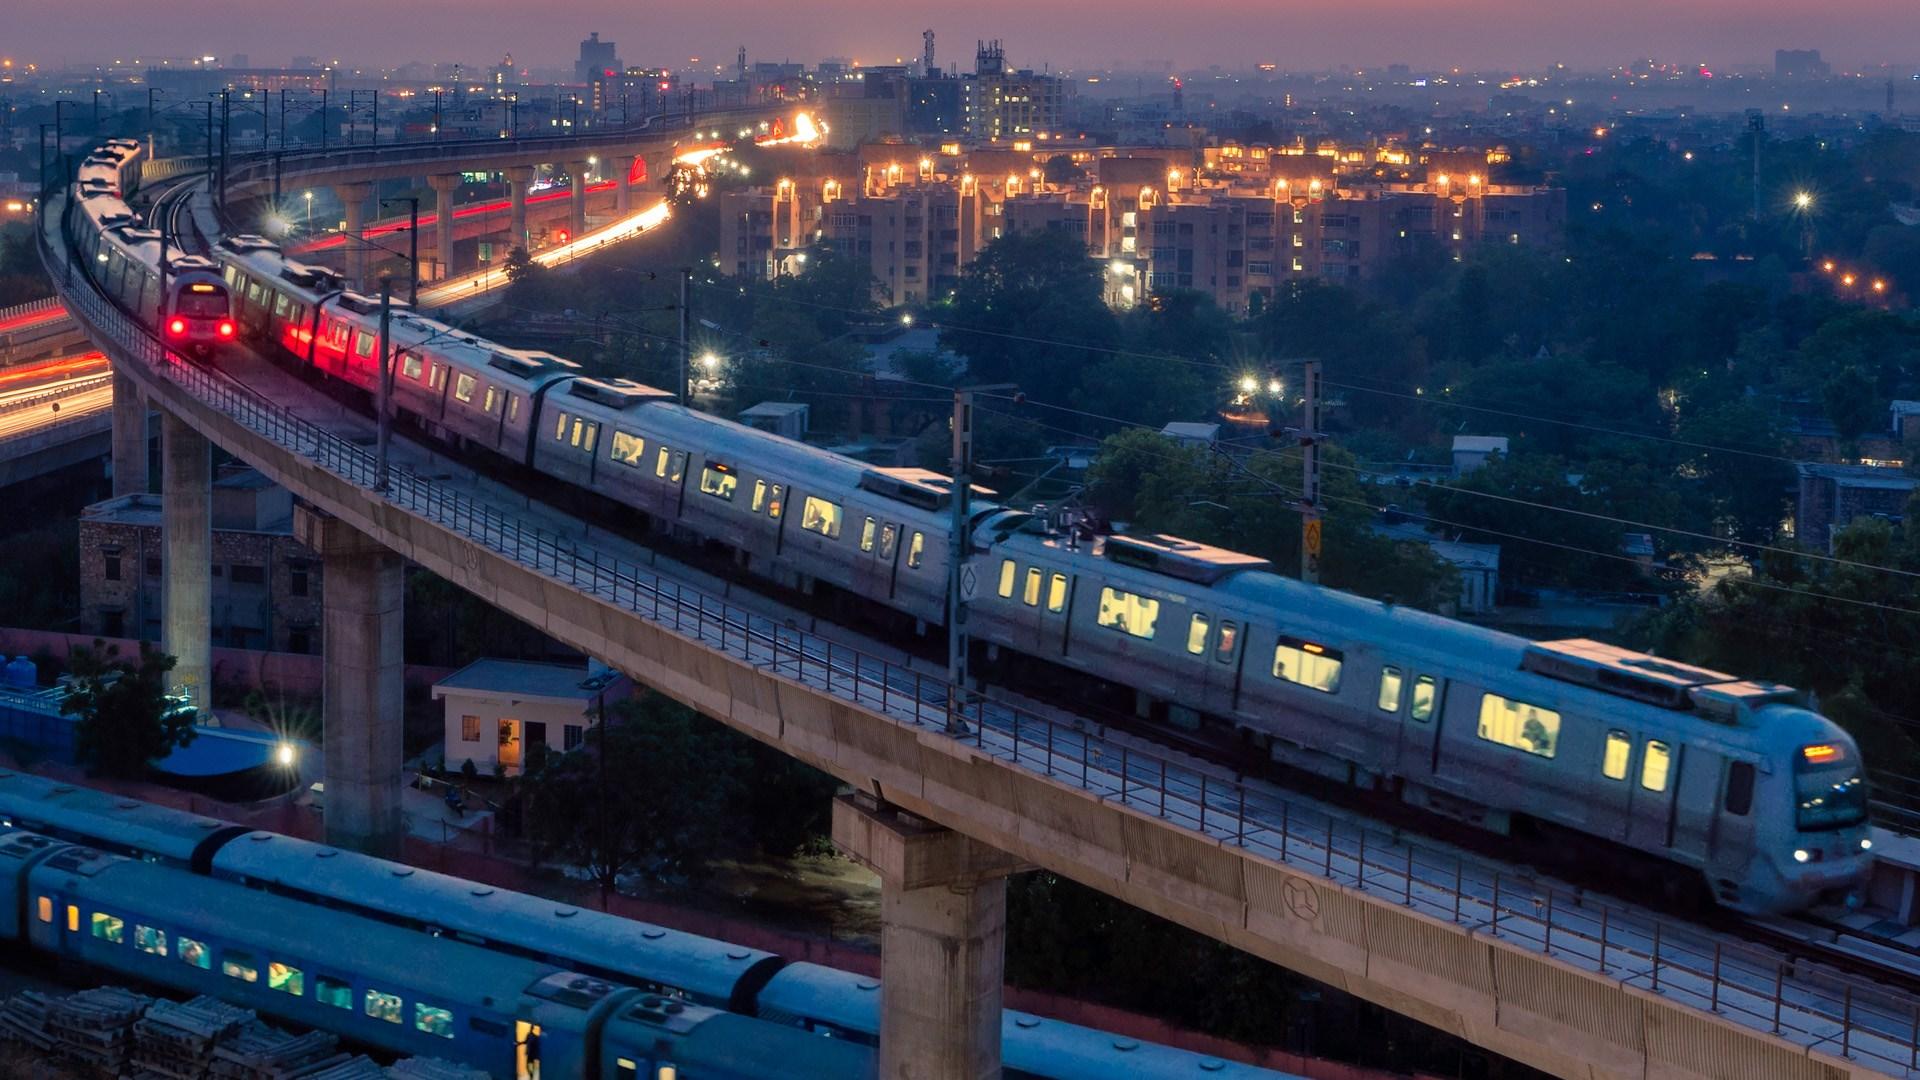 Two trains from the Jaipur Metro leading into a lit up city.